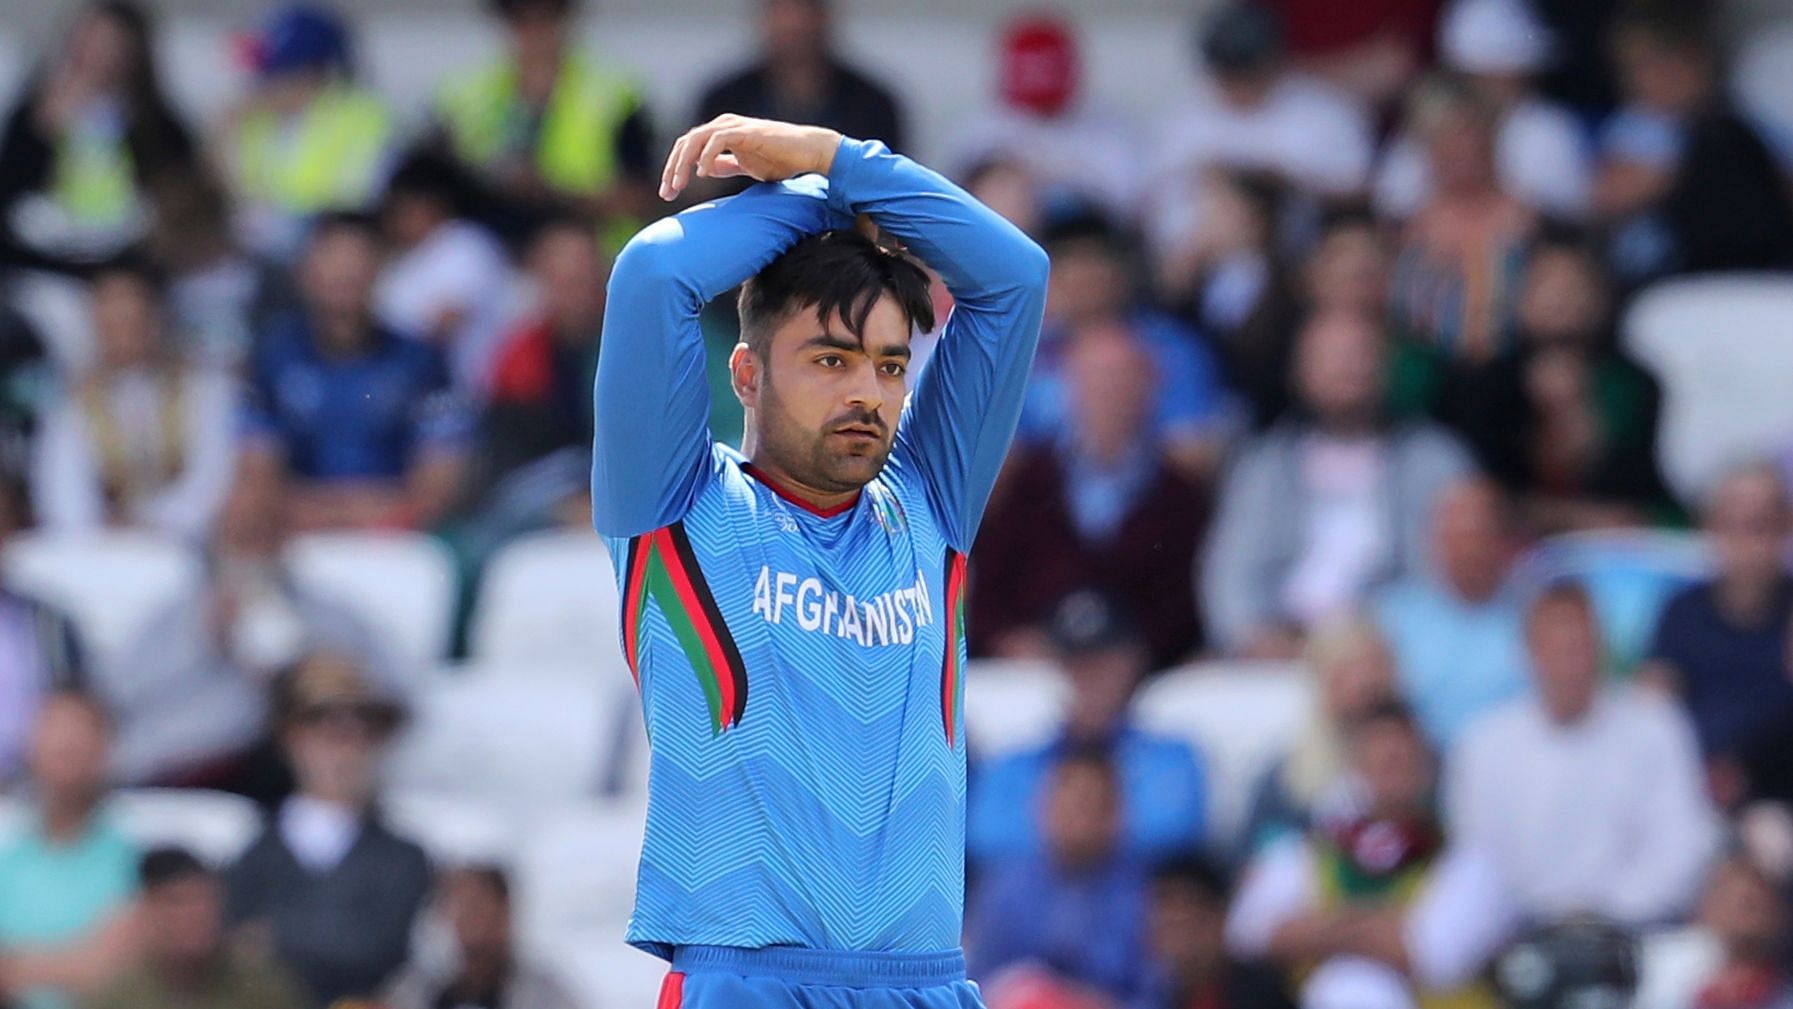 Rashid Khan picked just six wickets at an average of 69 and an economy of 5.79 in the 2019 World Cup.